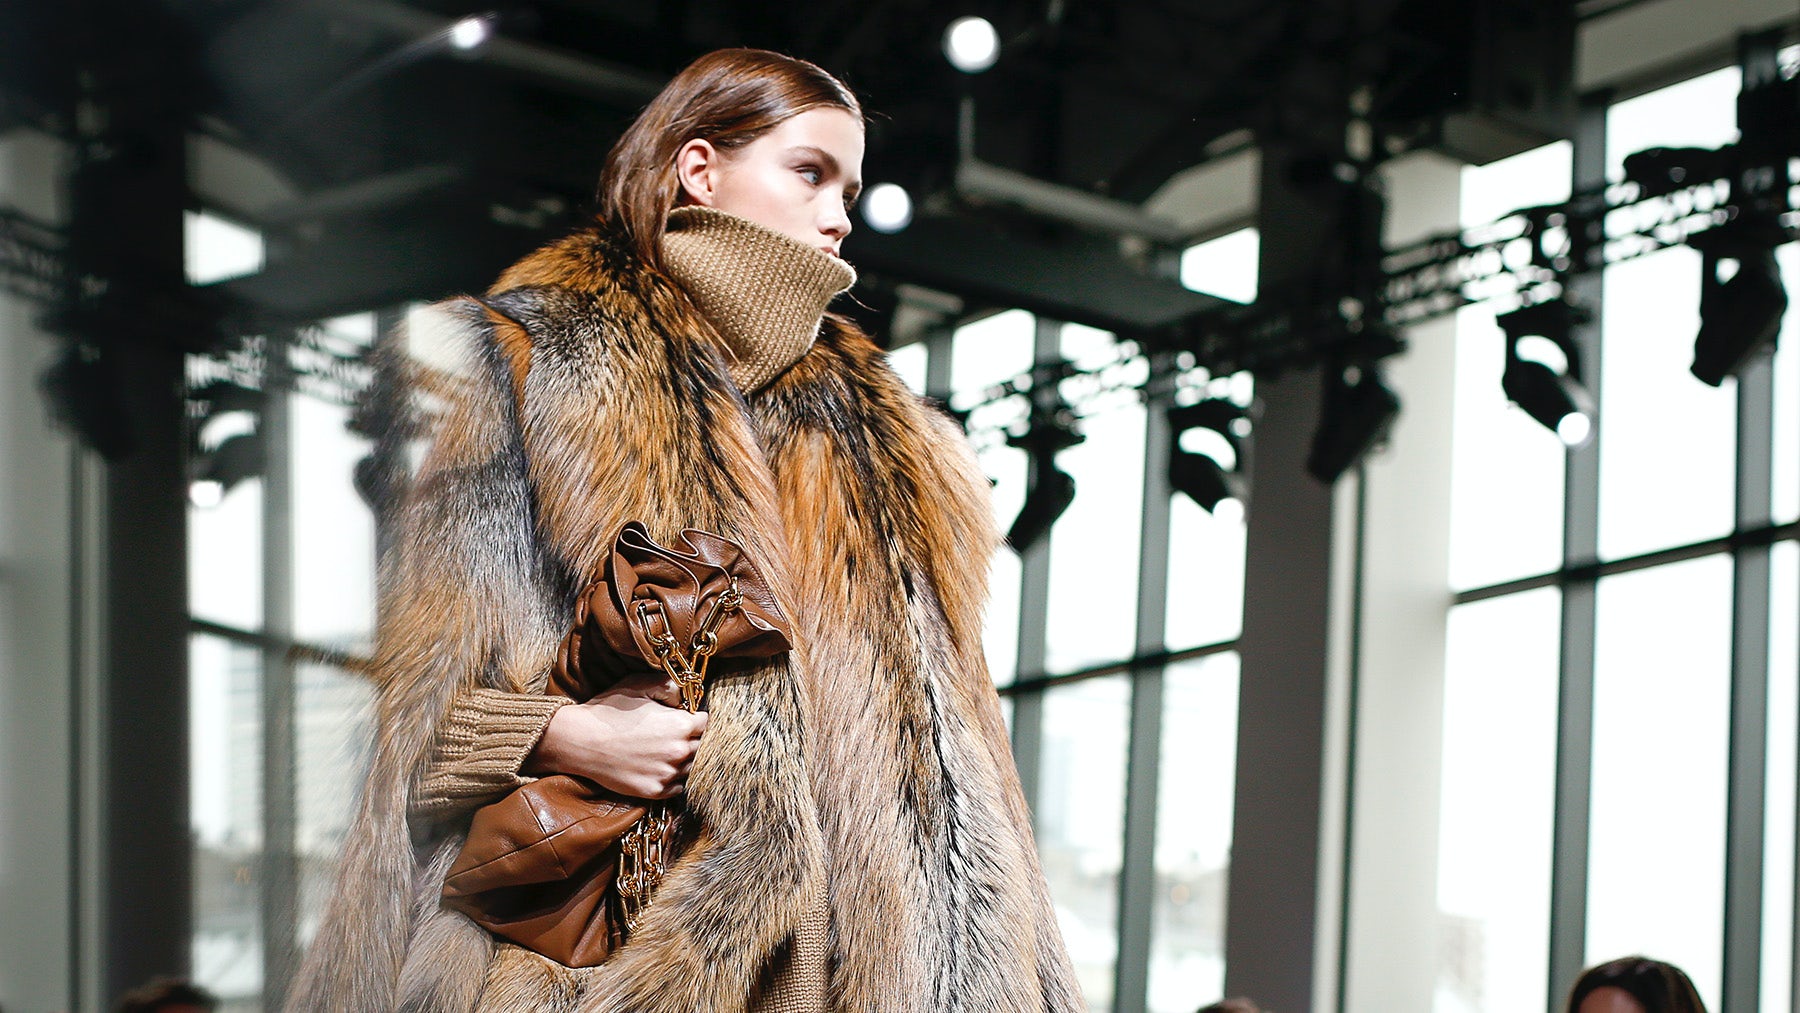 Michael Kors Commits to Going Fur-Free in 2018 | BoF